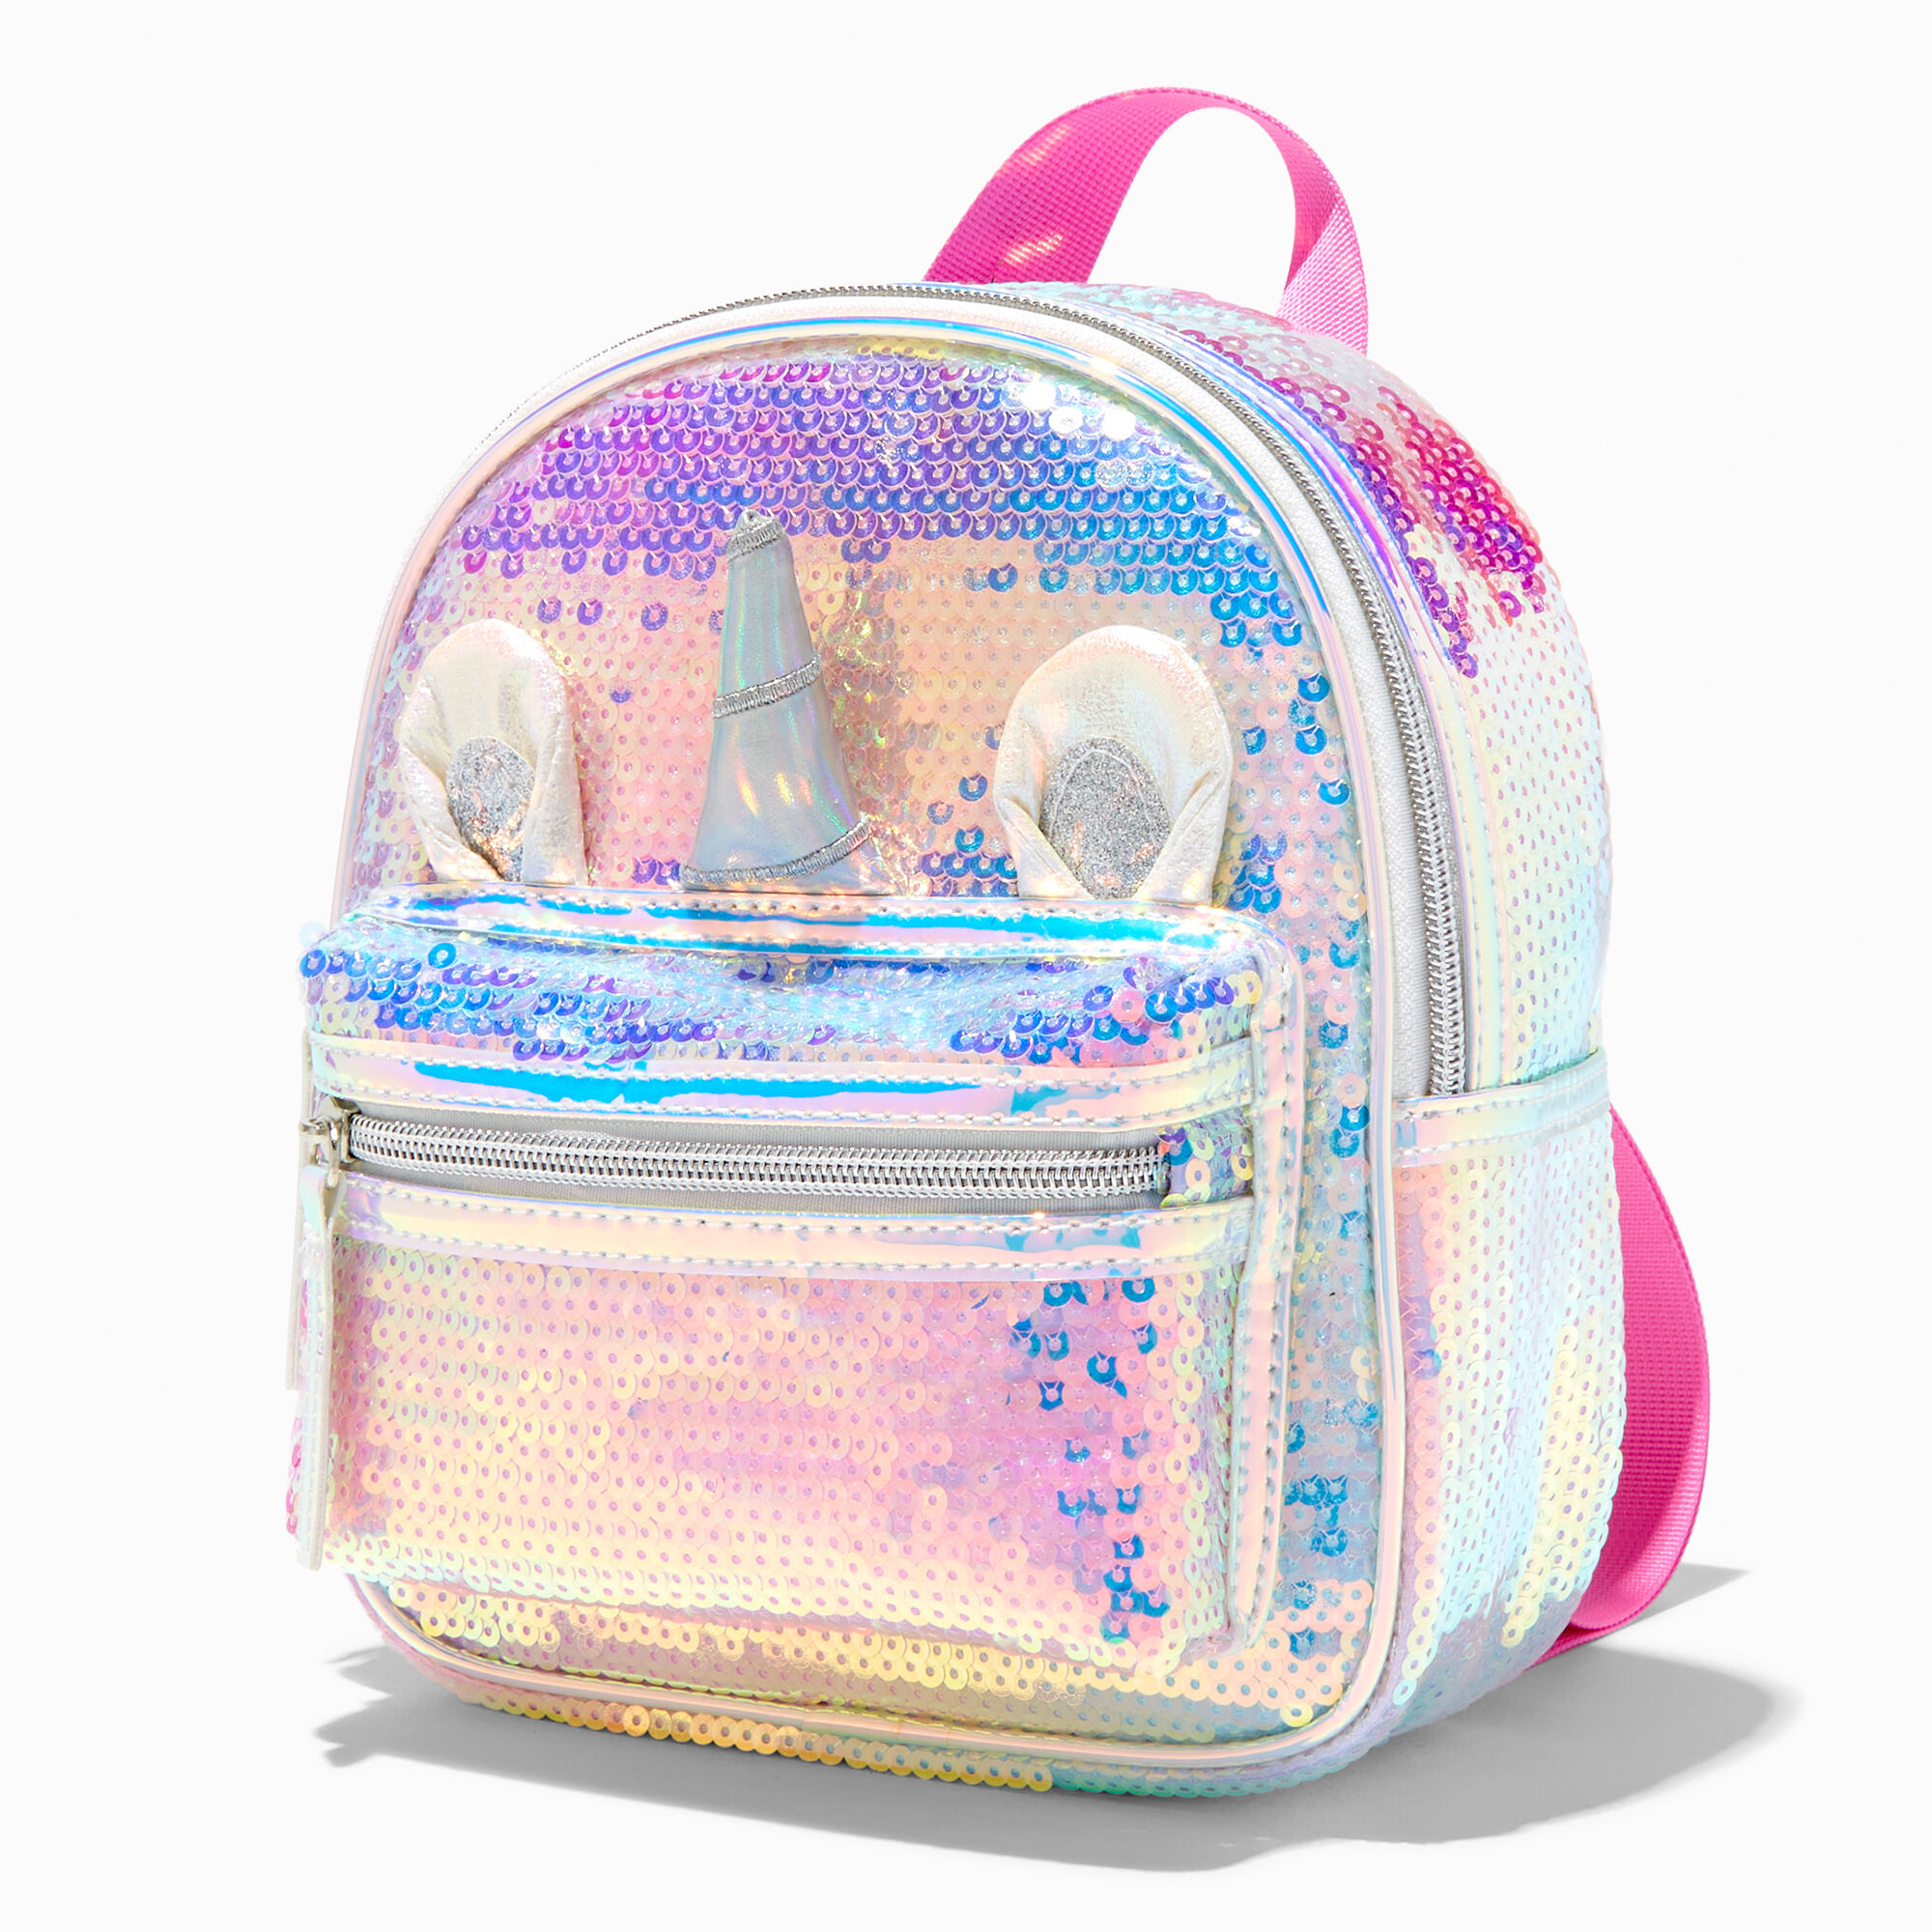 View Claires Club Sequin Unicorn Mini Backpack information